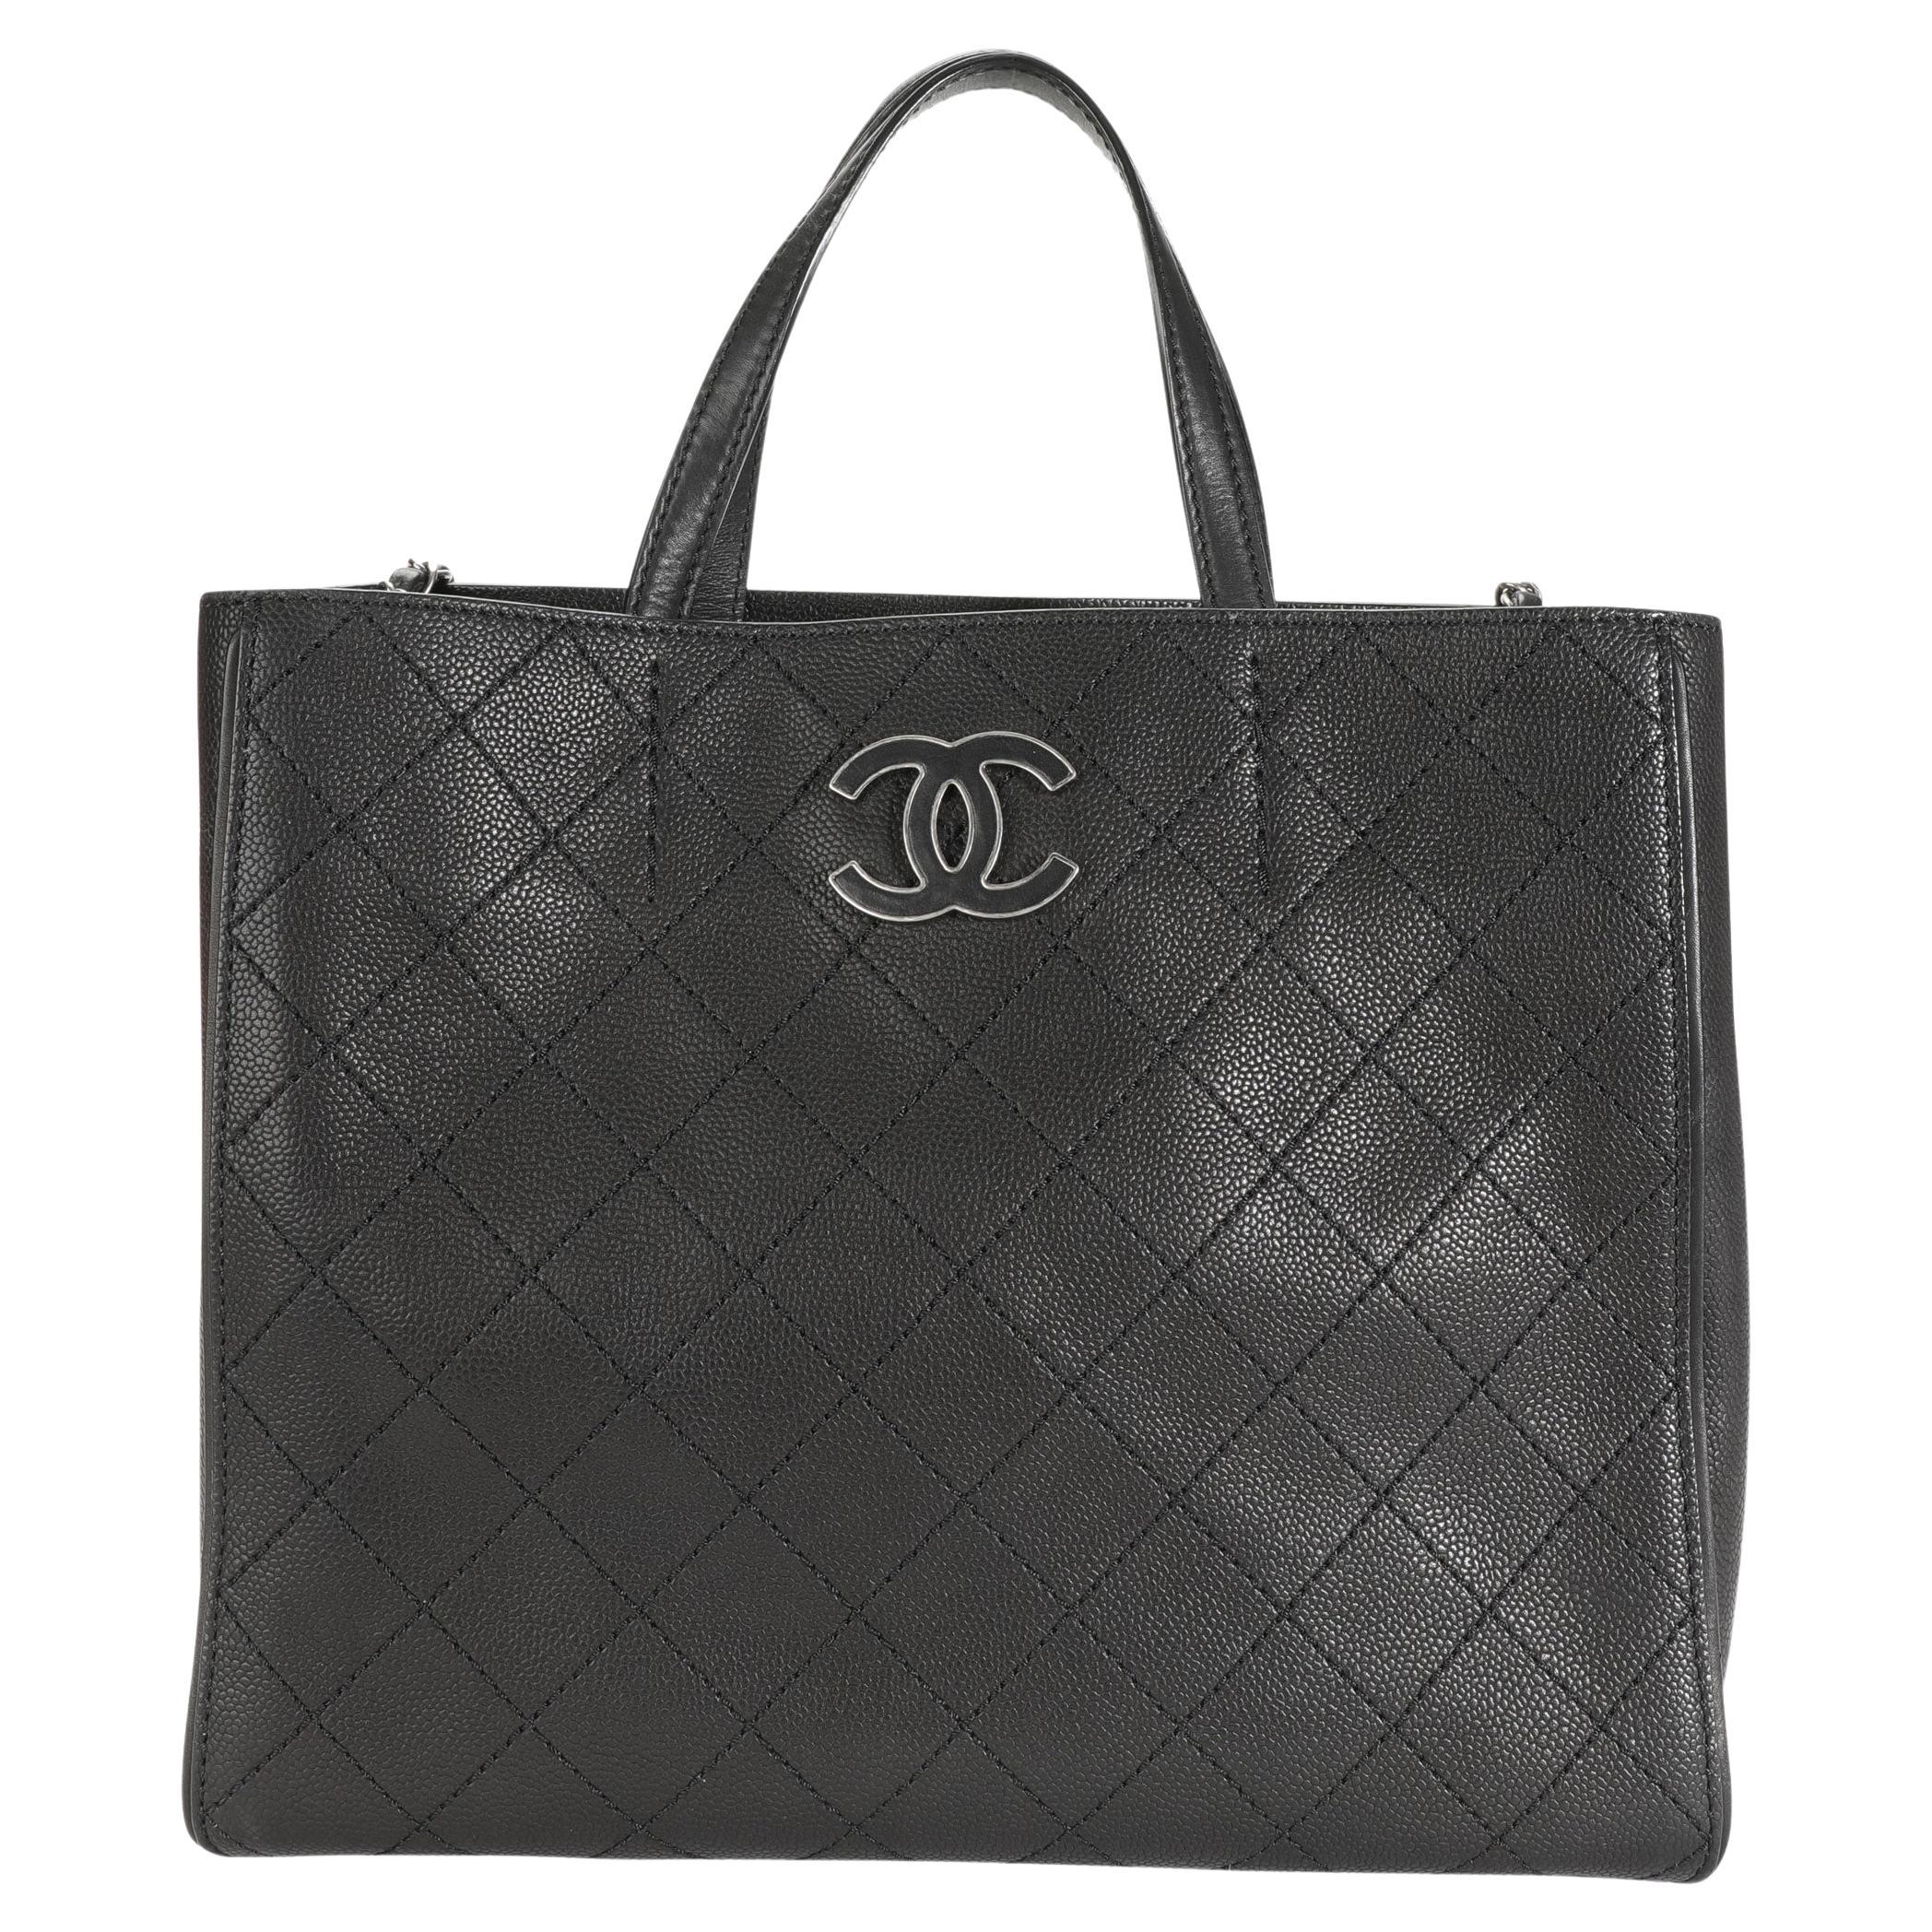 Chanel Black Stitched Grained Calfskin Hamptons Tote